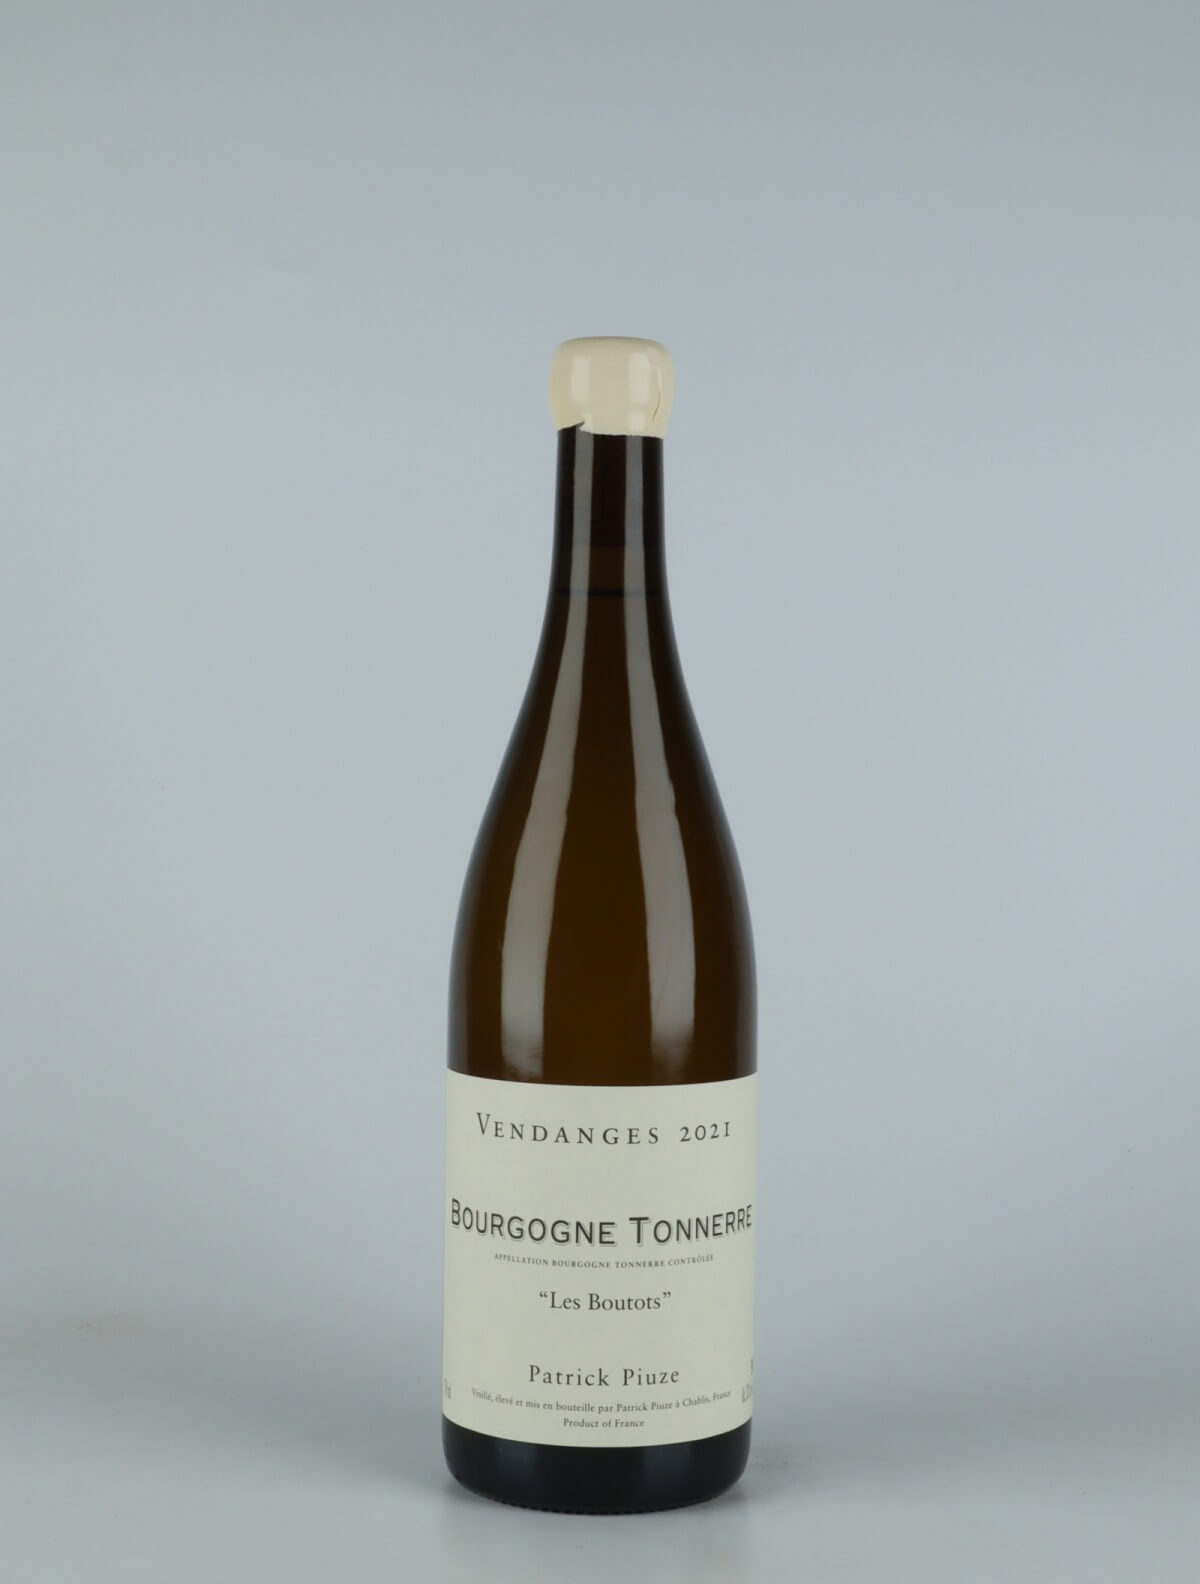 A bottle 2021 Bourgogne Tonnere - Les Boutots White wine from Patrick Piuze, Burgundy in France